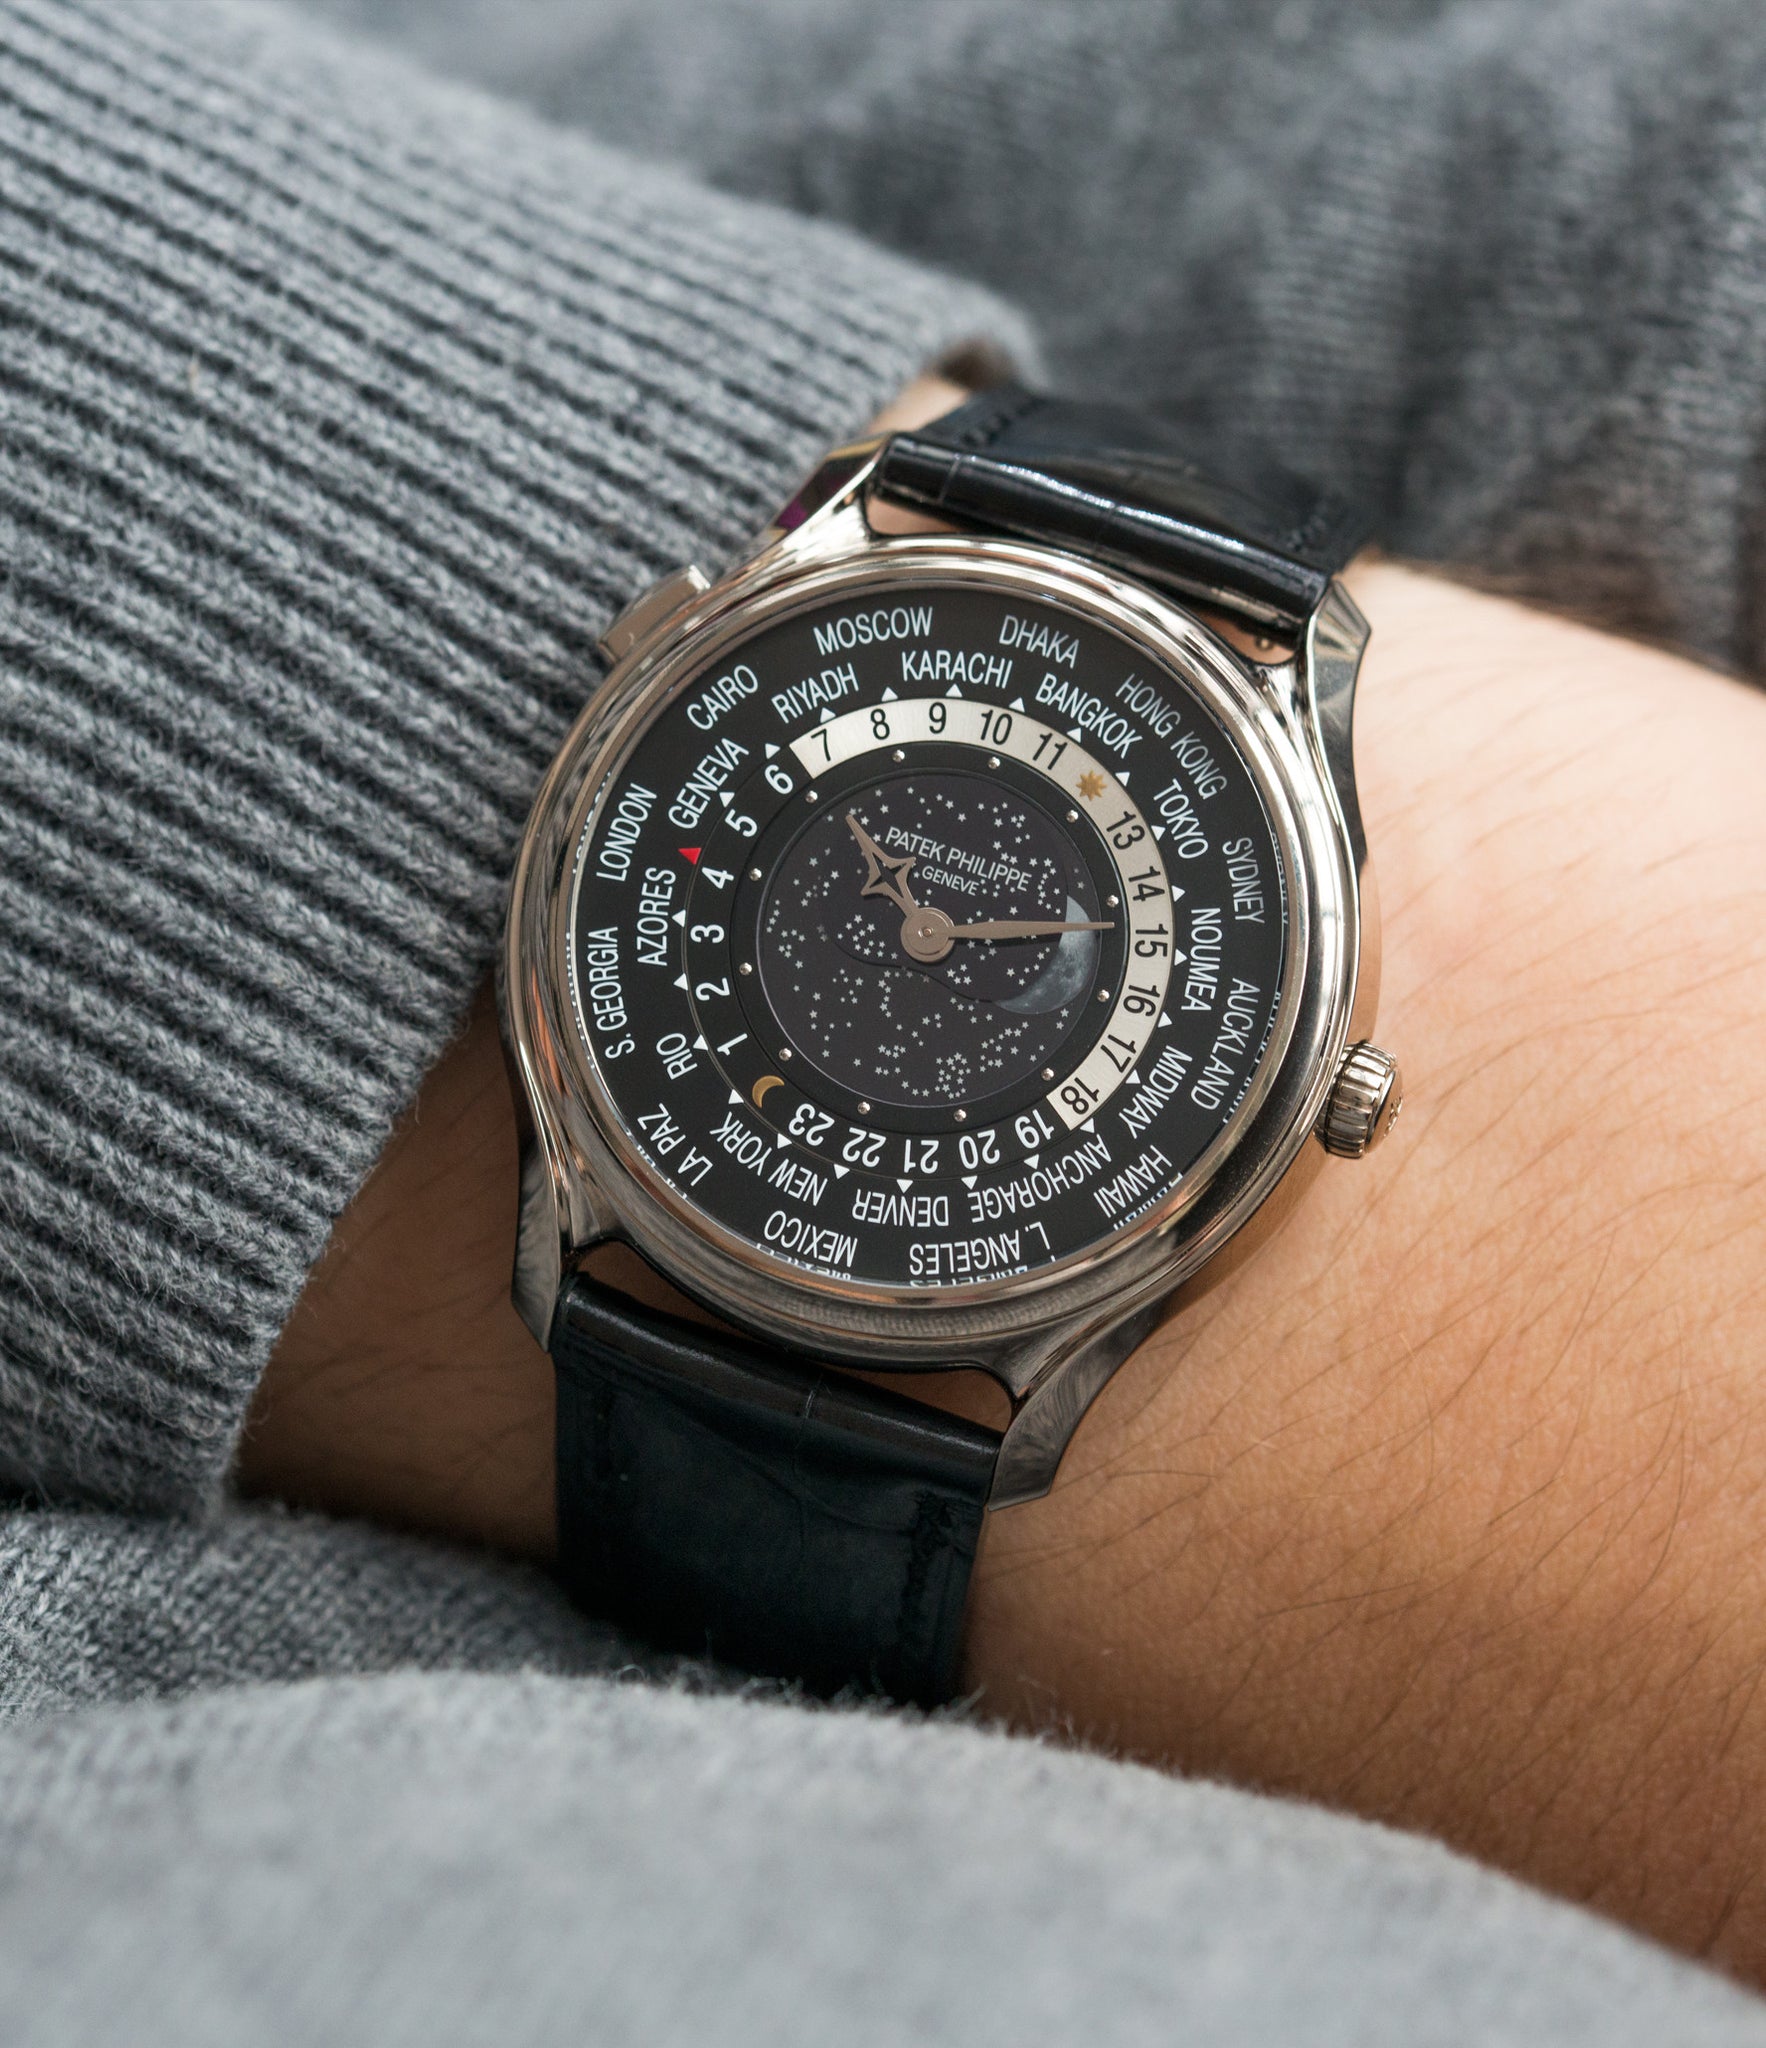 on the wrist Patek Philippe Worldtimer Moonphase 5575G 175th Anniversary white gold preowned dress watch for sale online at A Collected Man London rare watch specialist